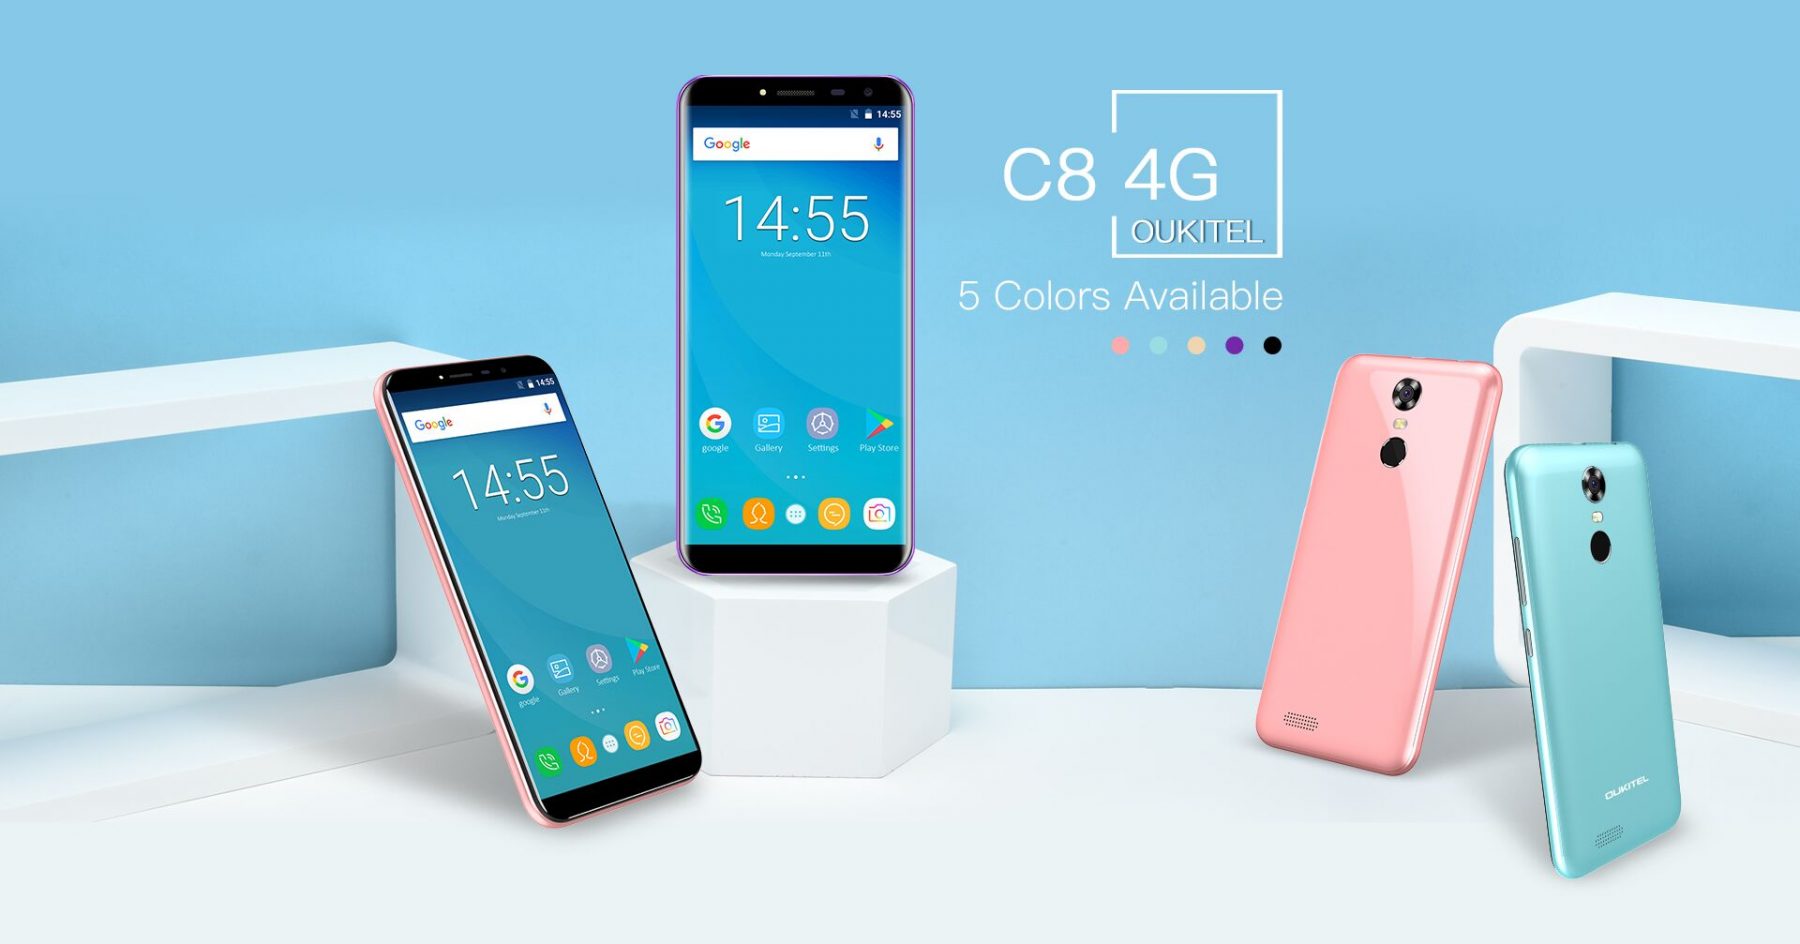 OUKITEL C8 4G Announced to Bring Better Connectivity Than the Original C8